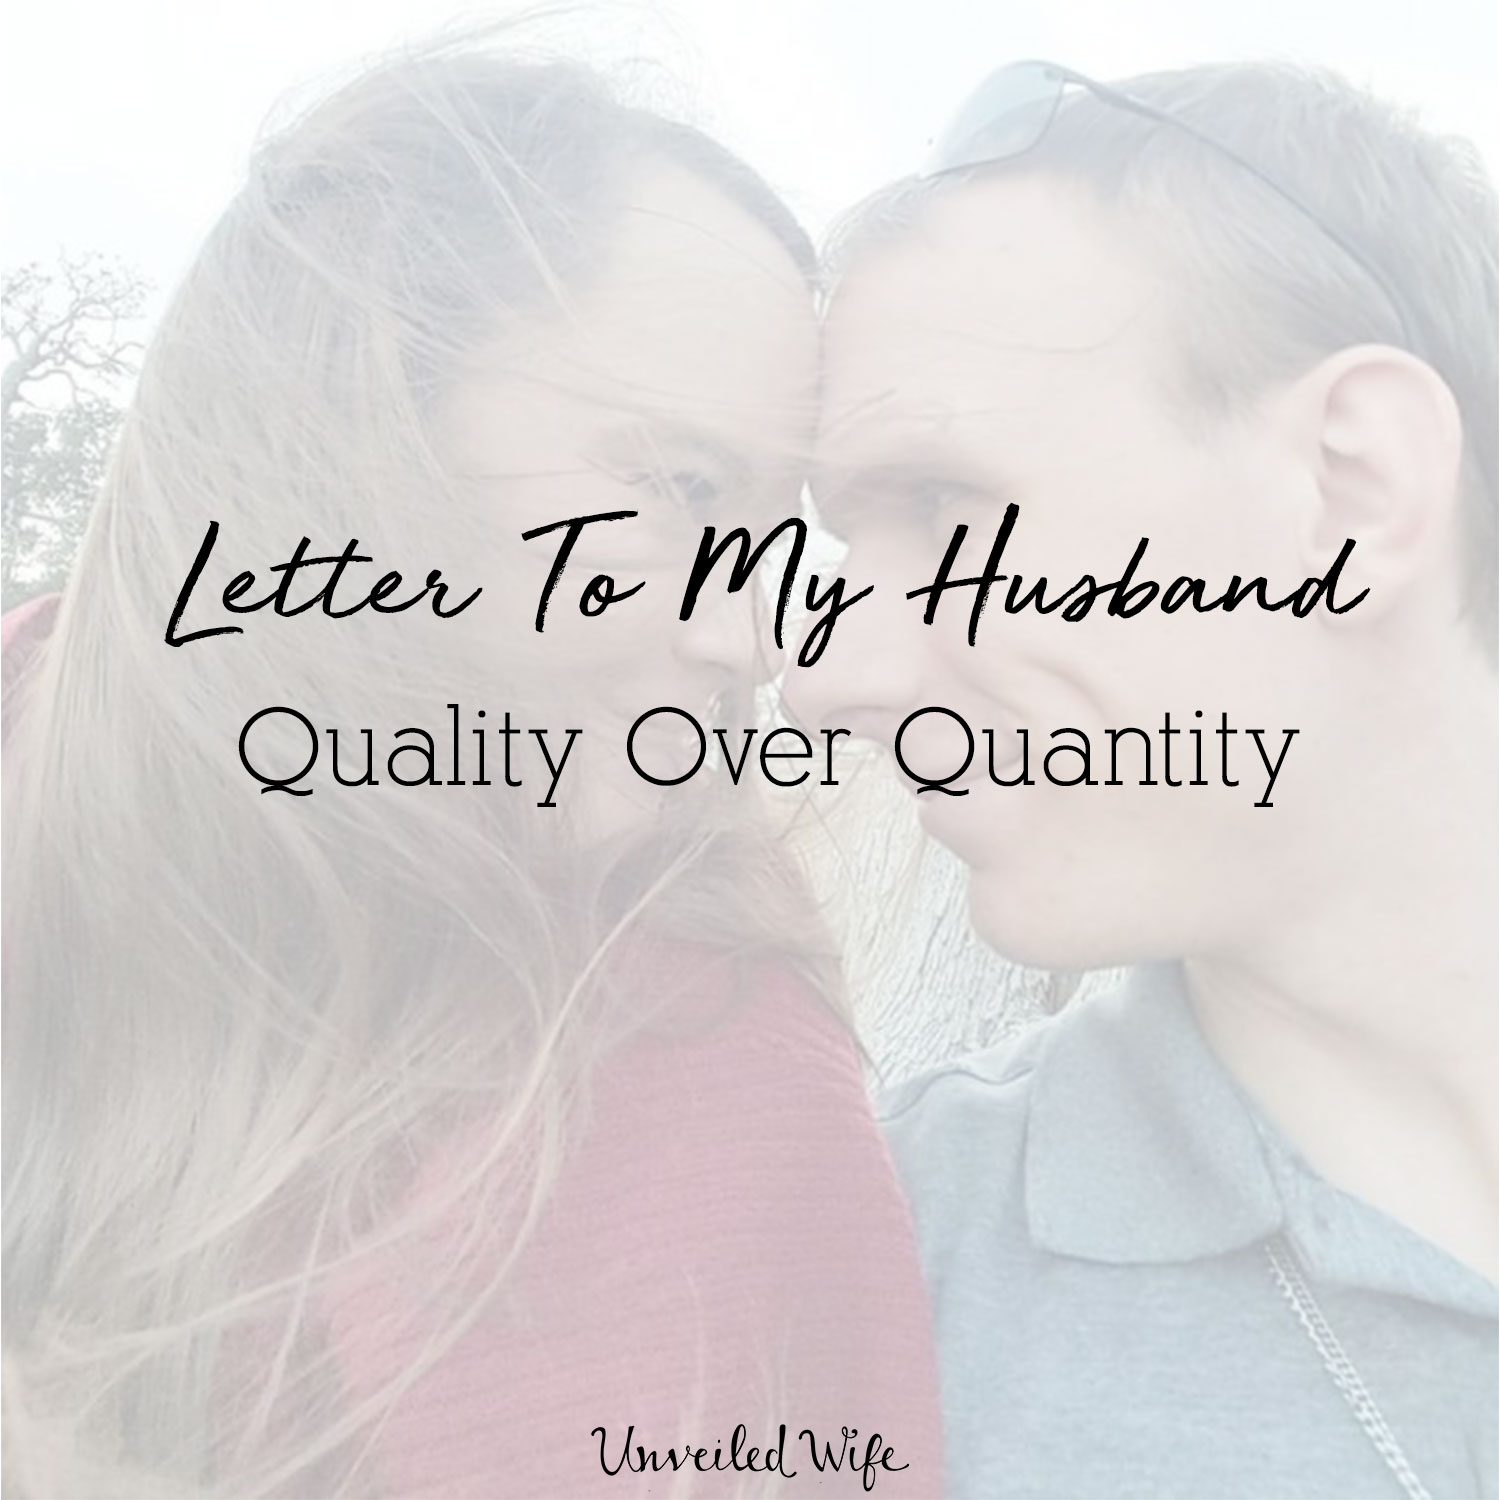 Letter To My Husband: Quality Over Quantity